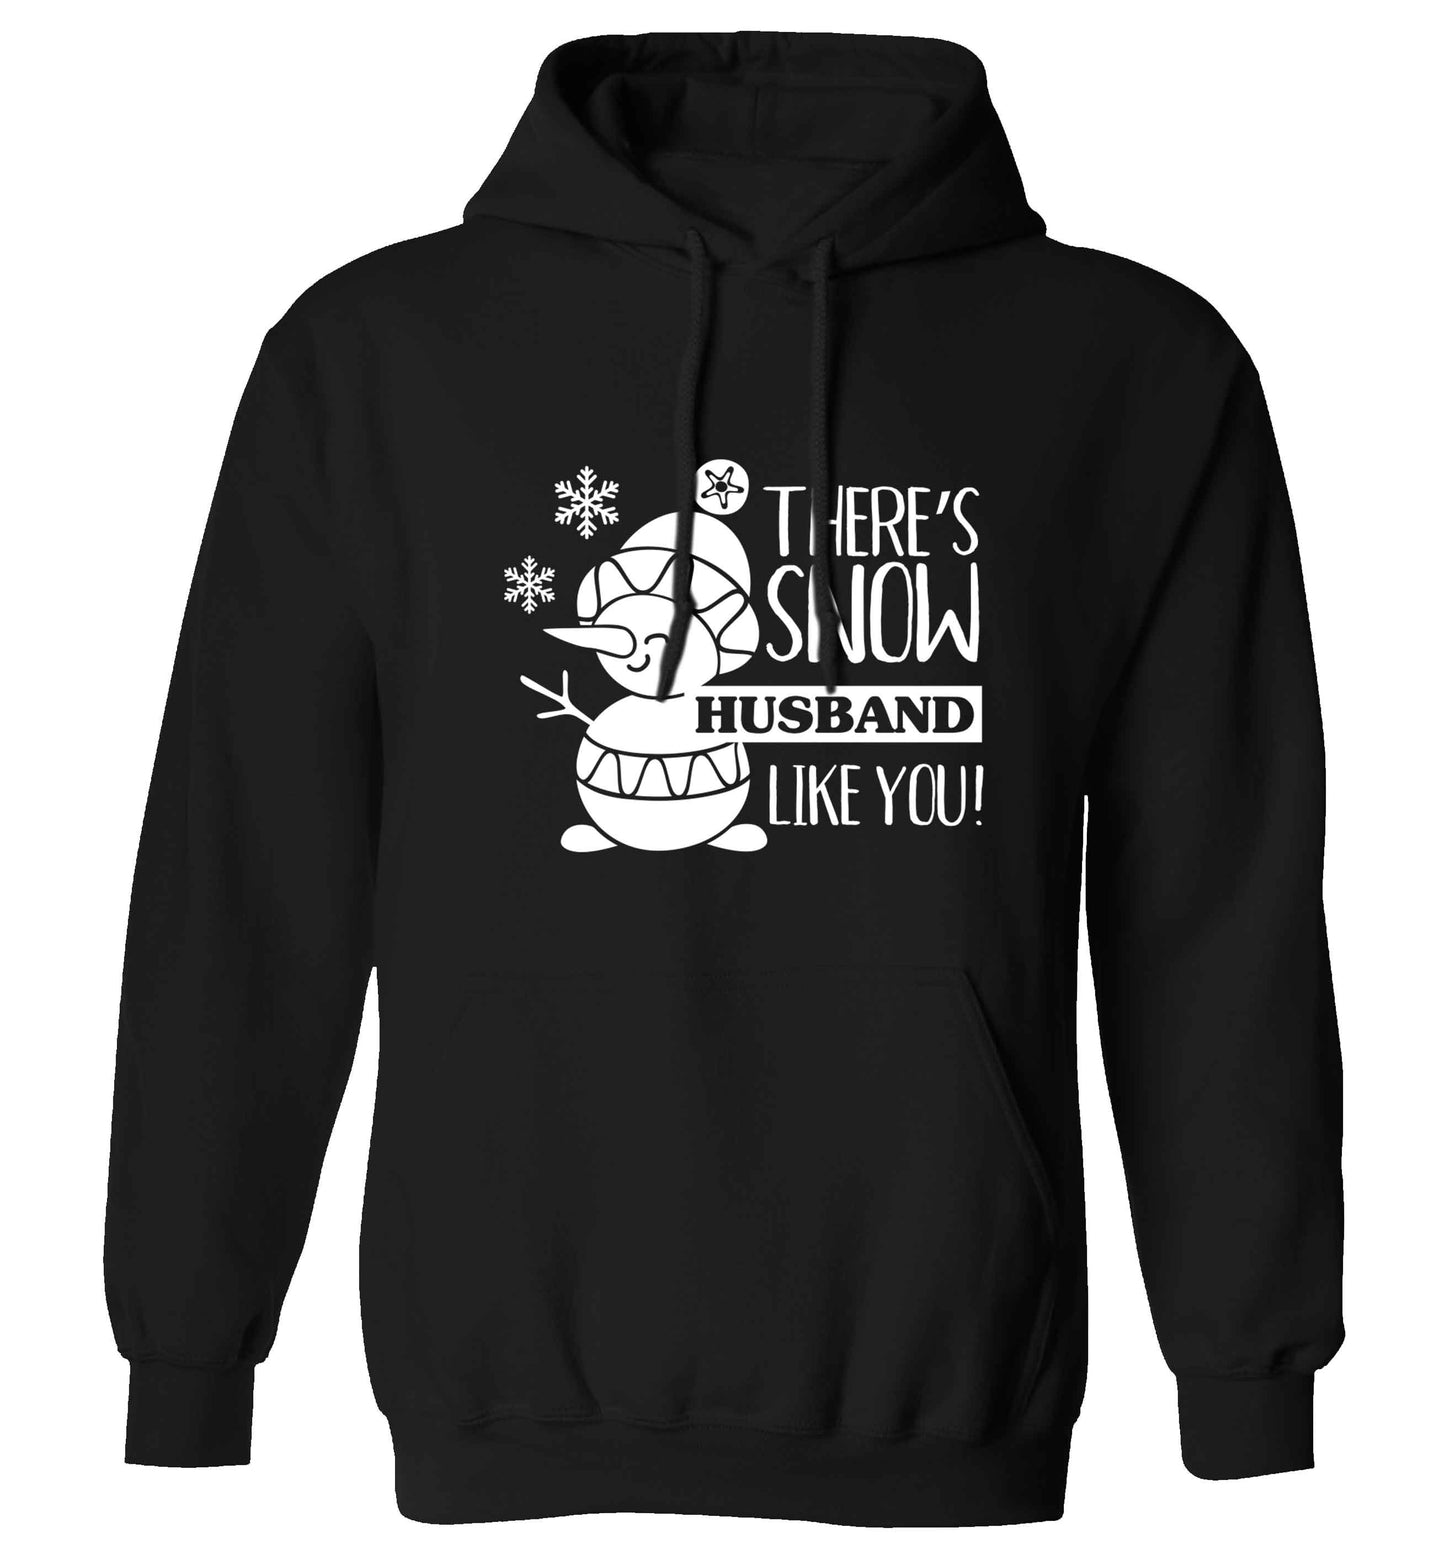 There's snow husband like you adults unisex black hoodie 2XL